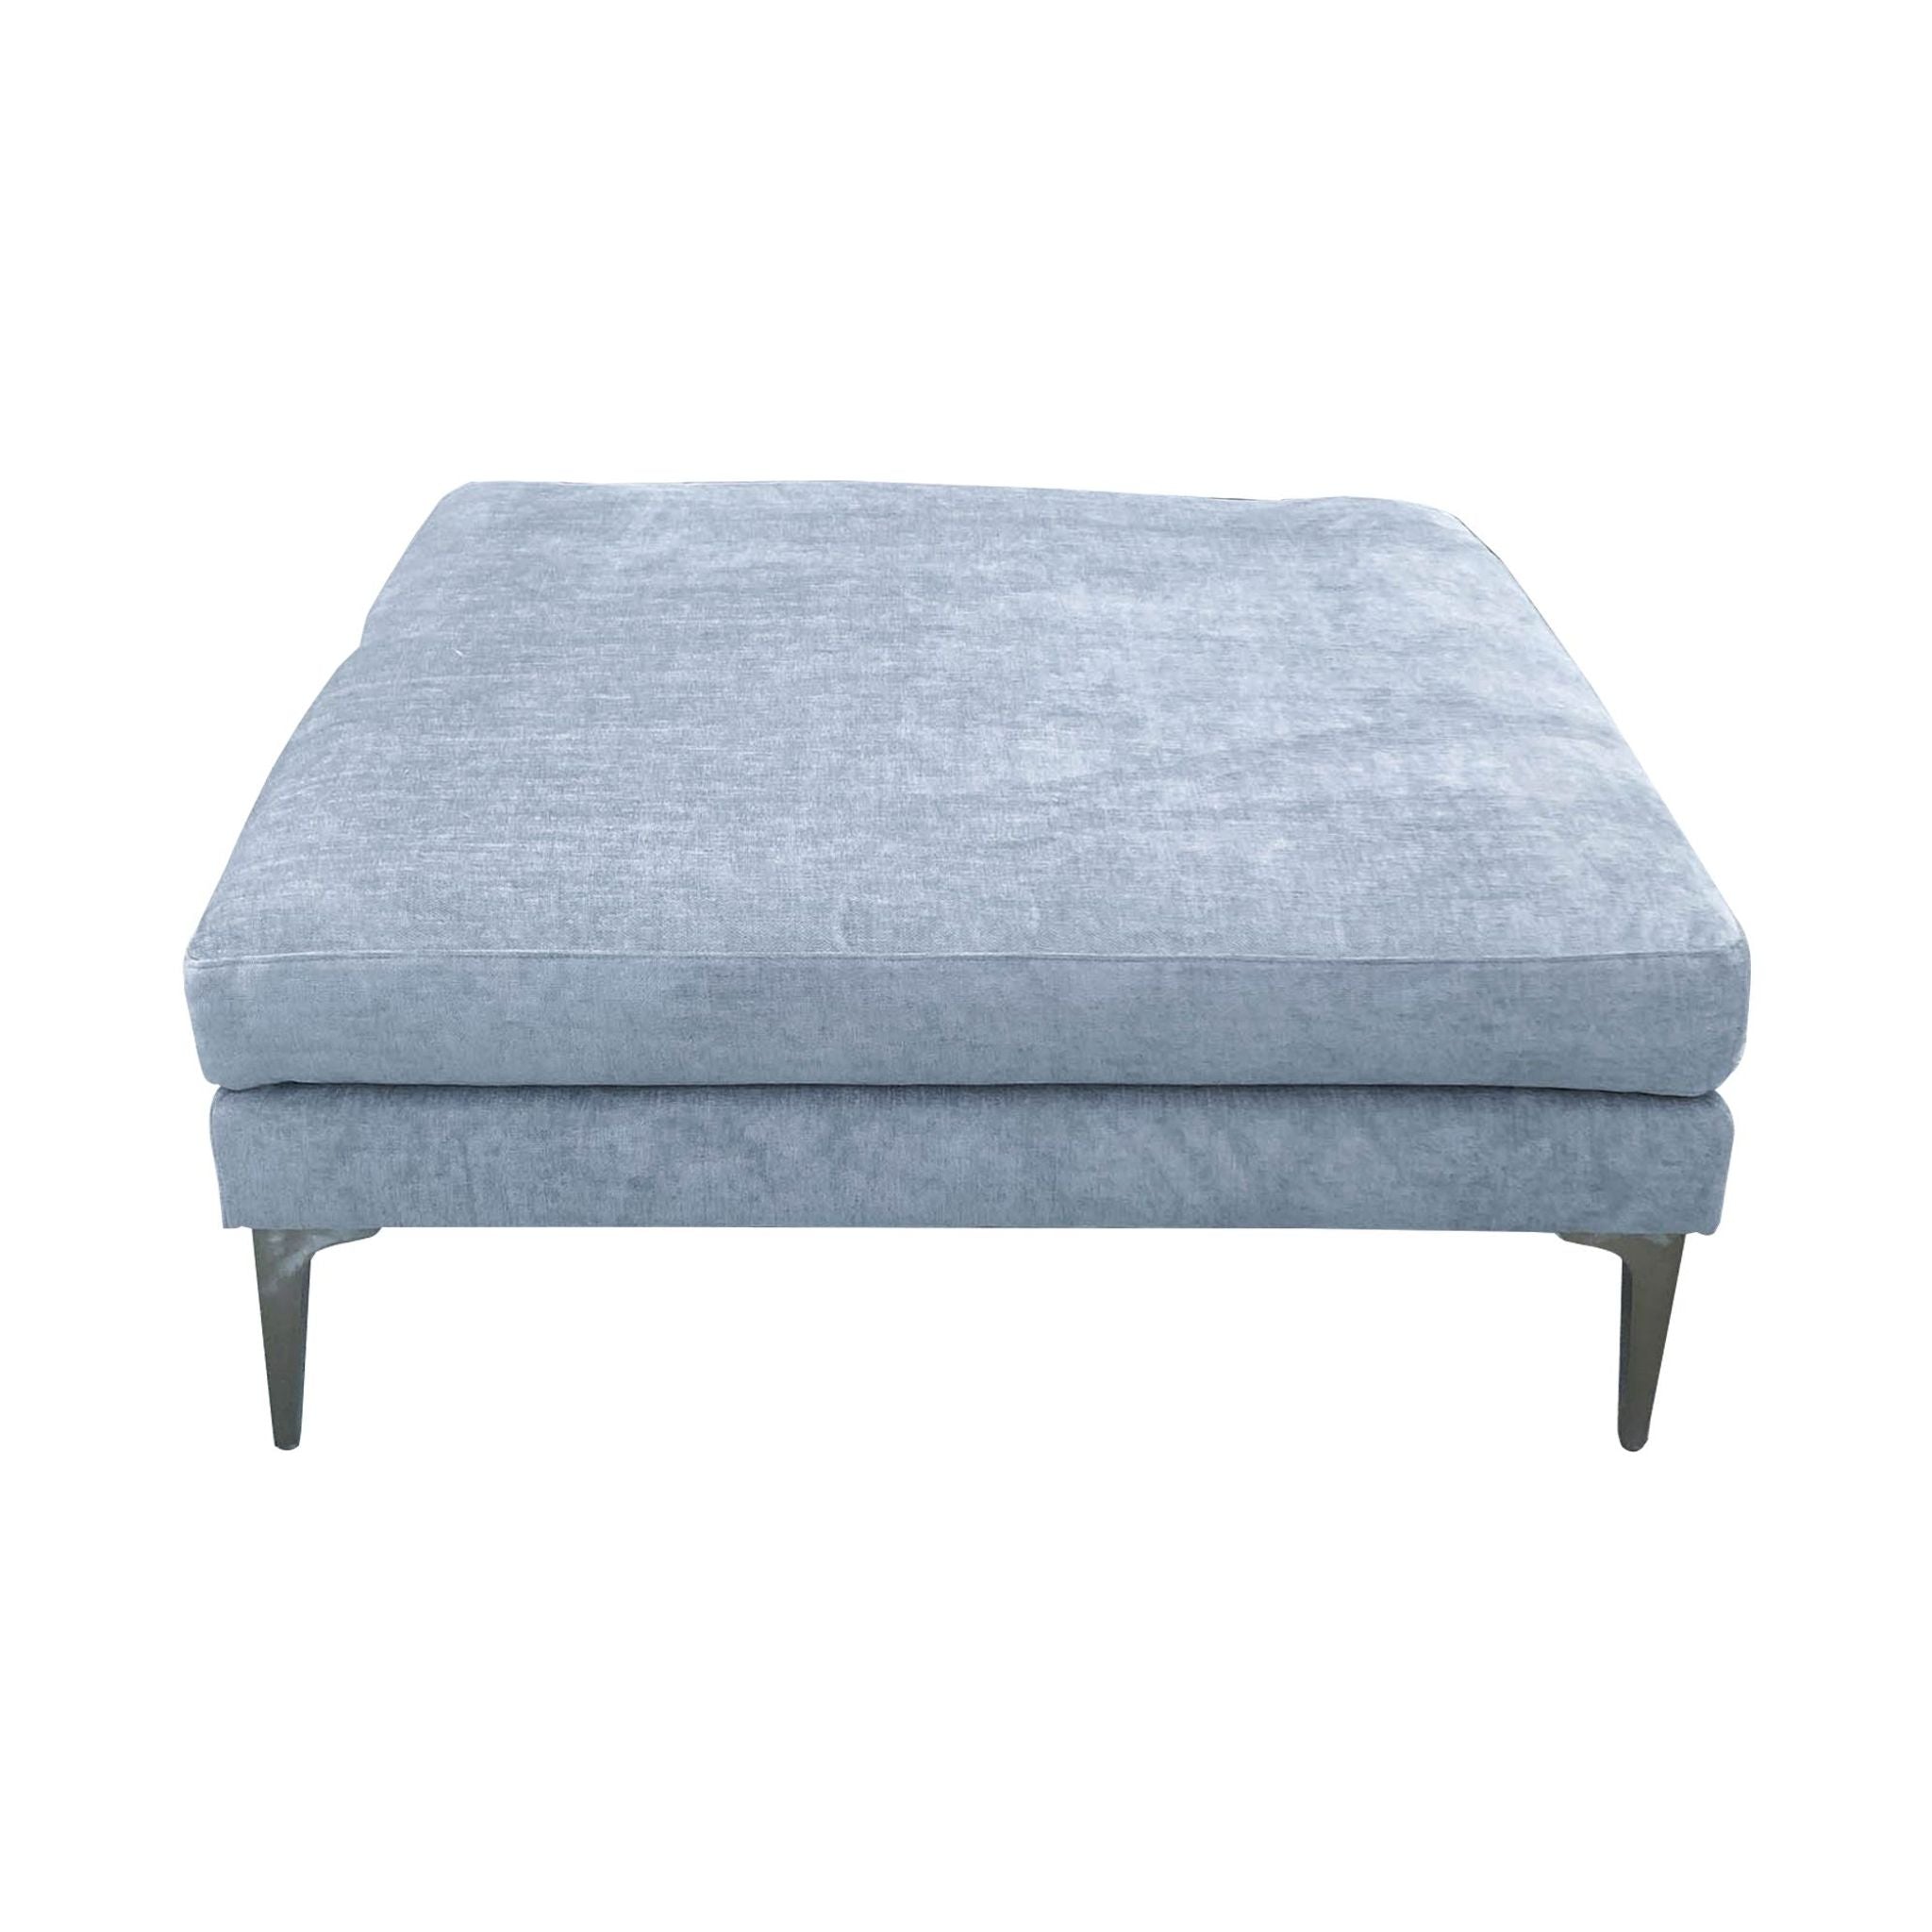 2. Modern Andes Ottoman by West Elm in mineral grey with a velvet finish and unique metal legs for a chic look.